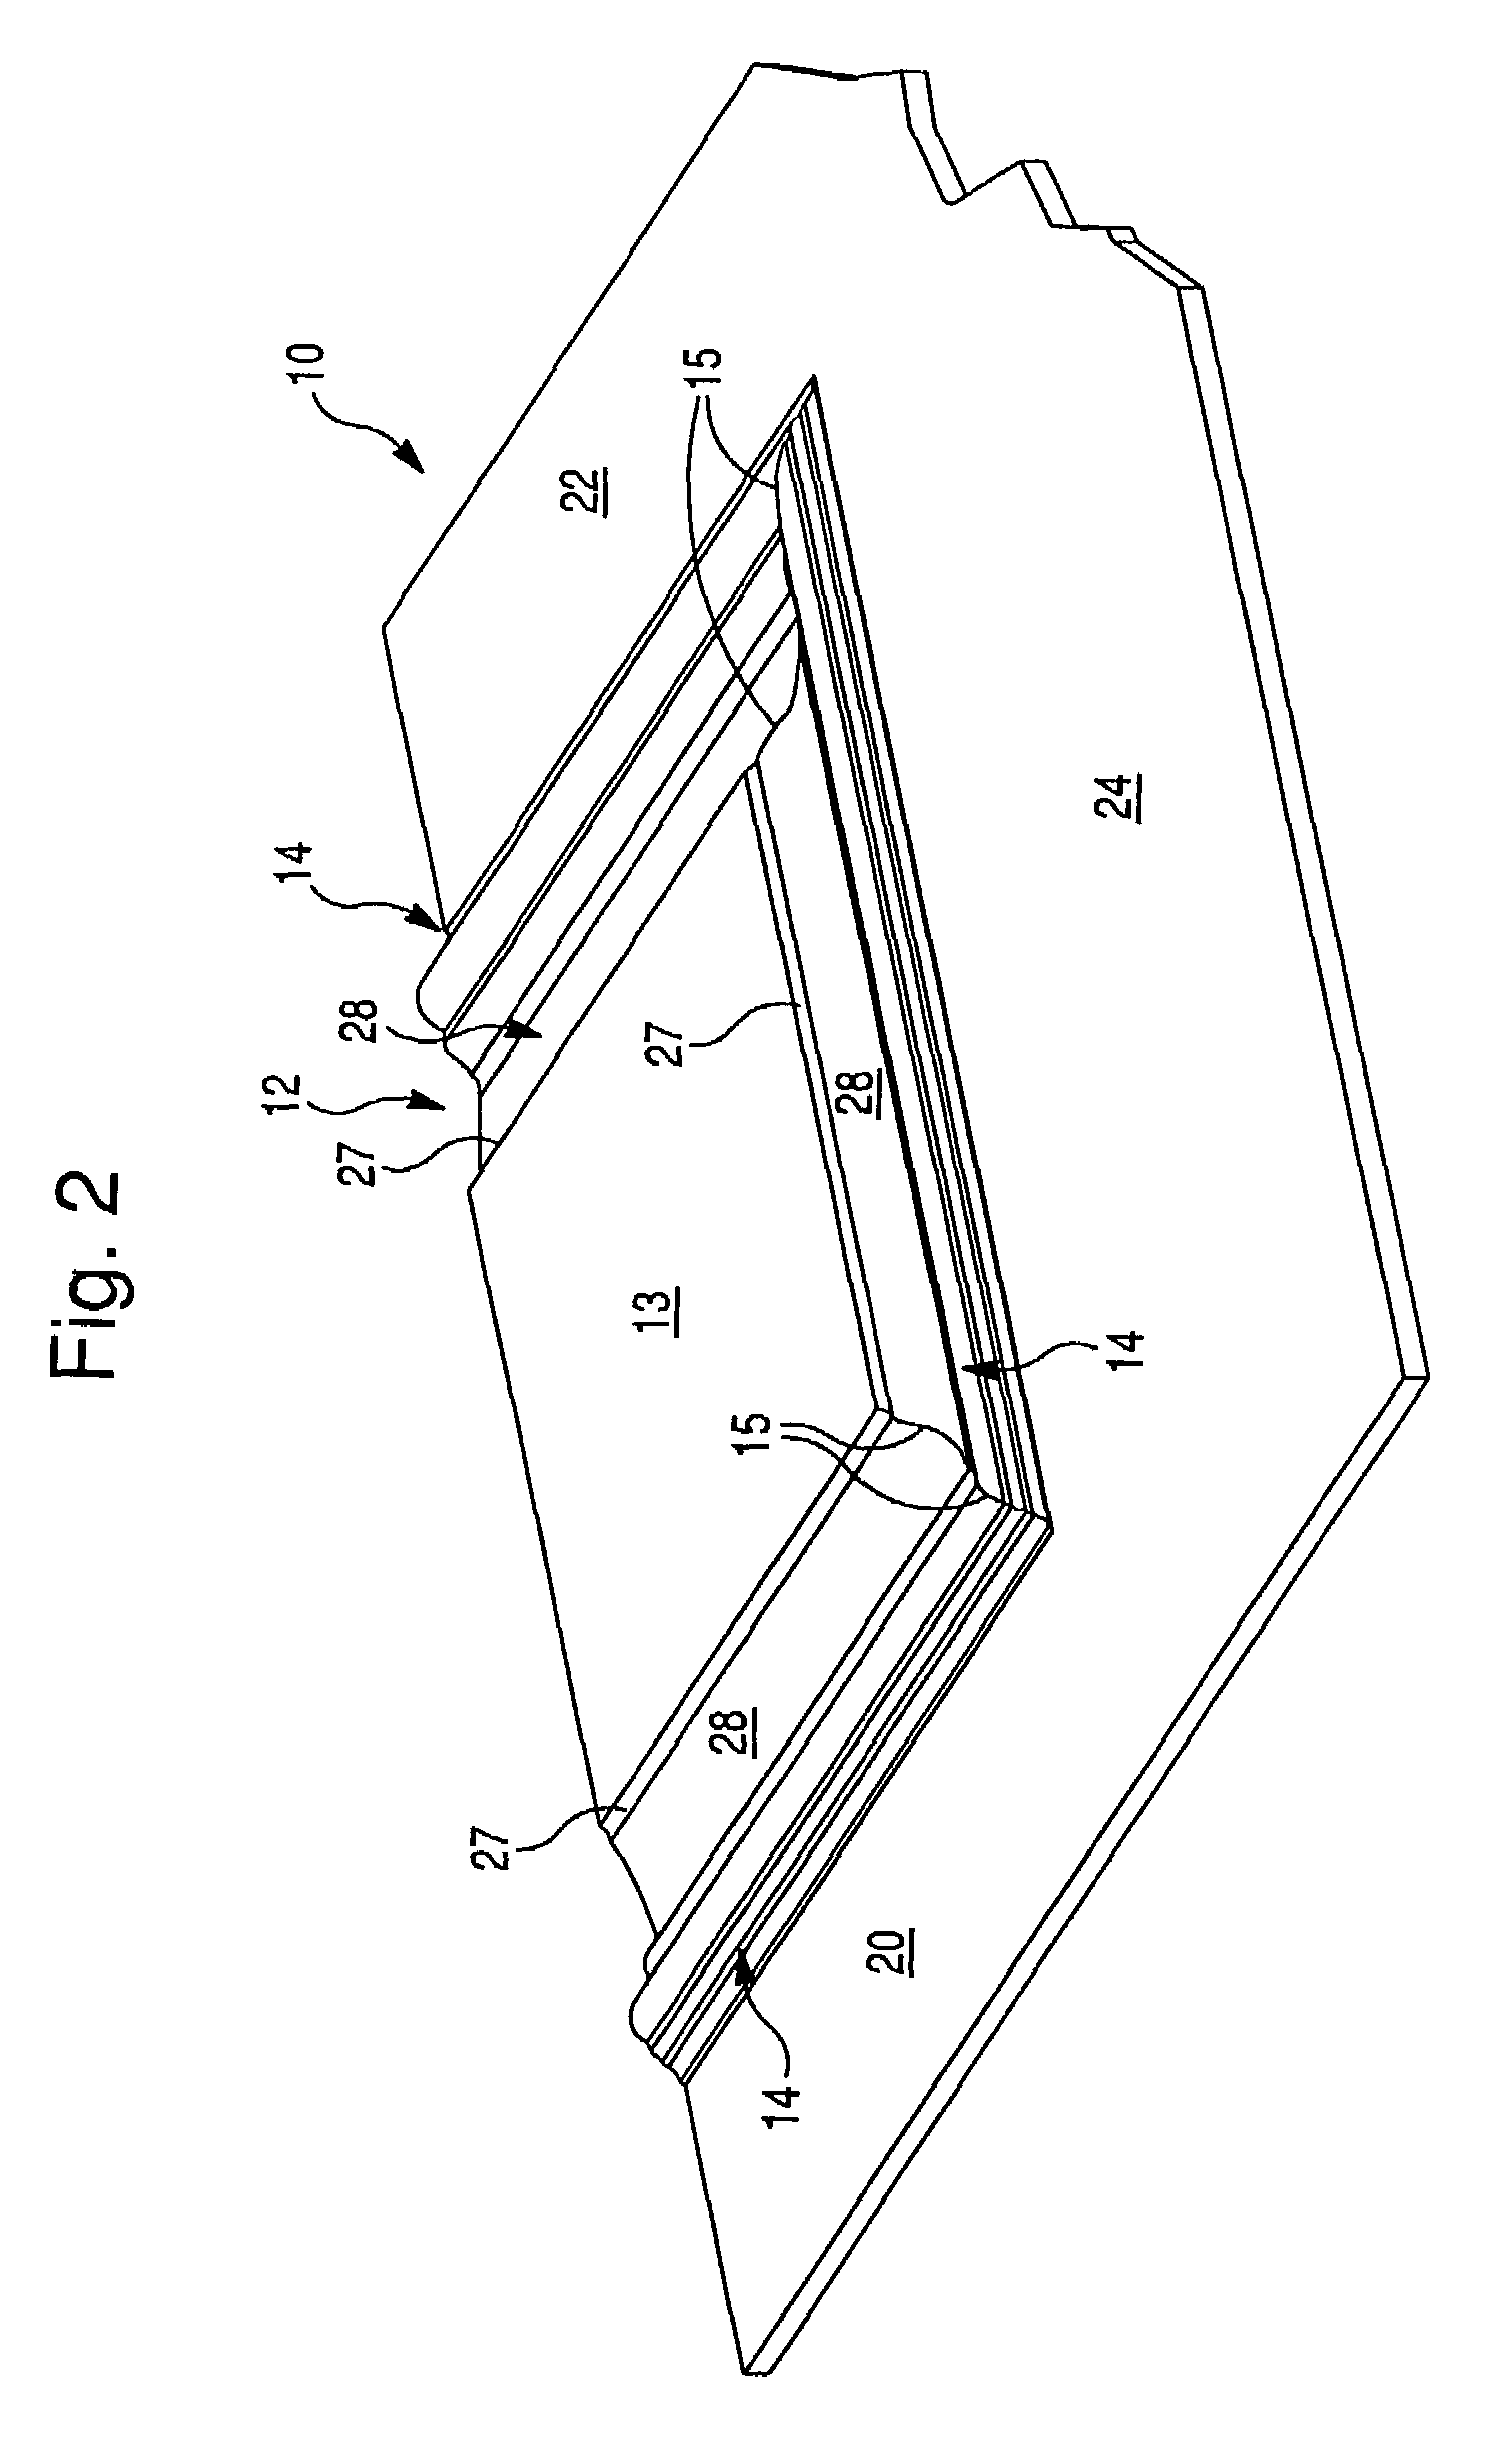 Reverse molded panel, method of manufacture, and door manufactured therefrom